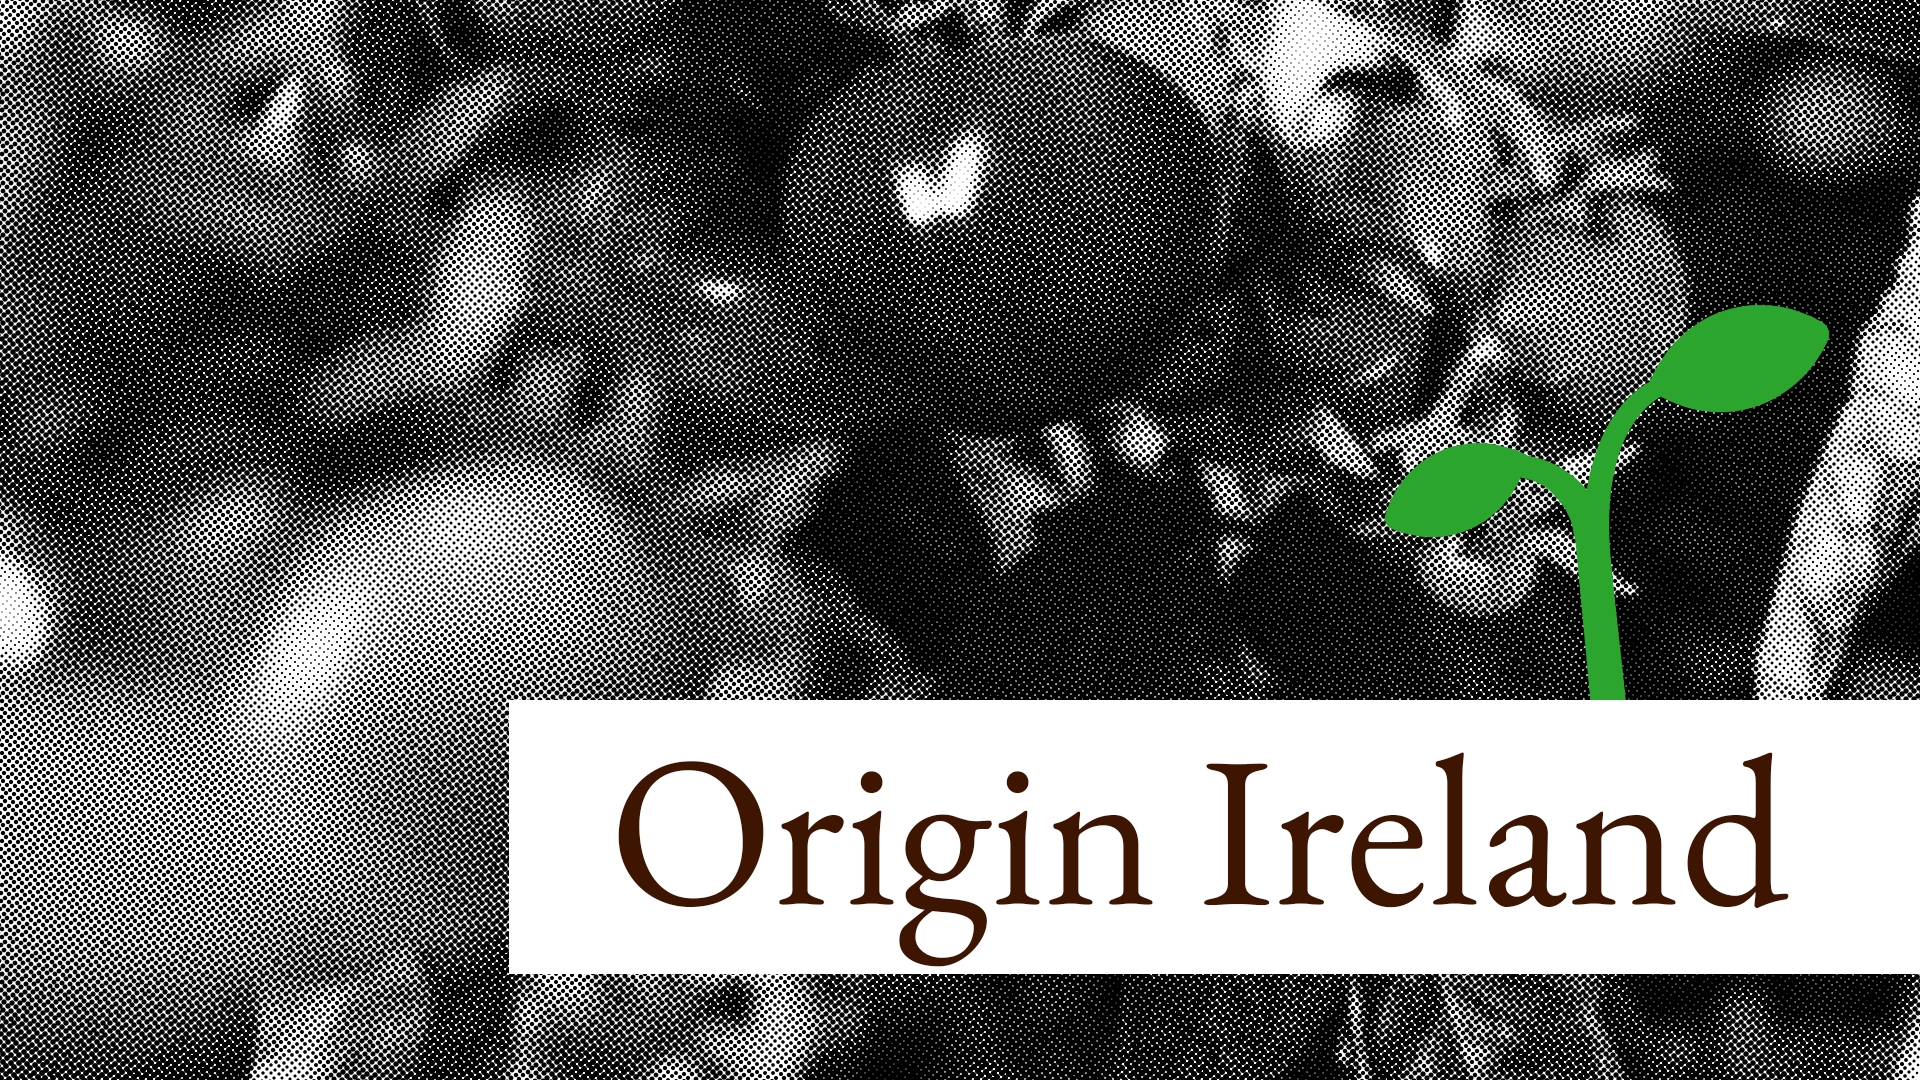 Origin food Ireland is cheap and 🌱 promising